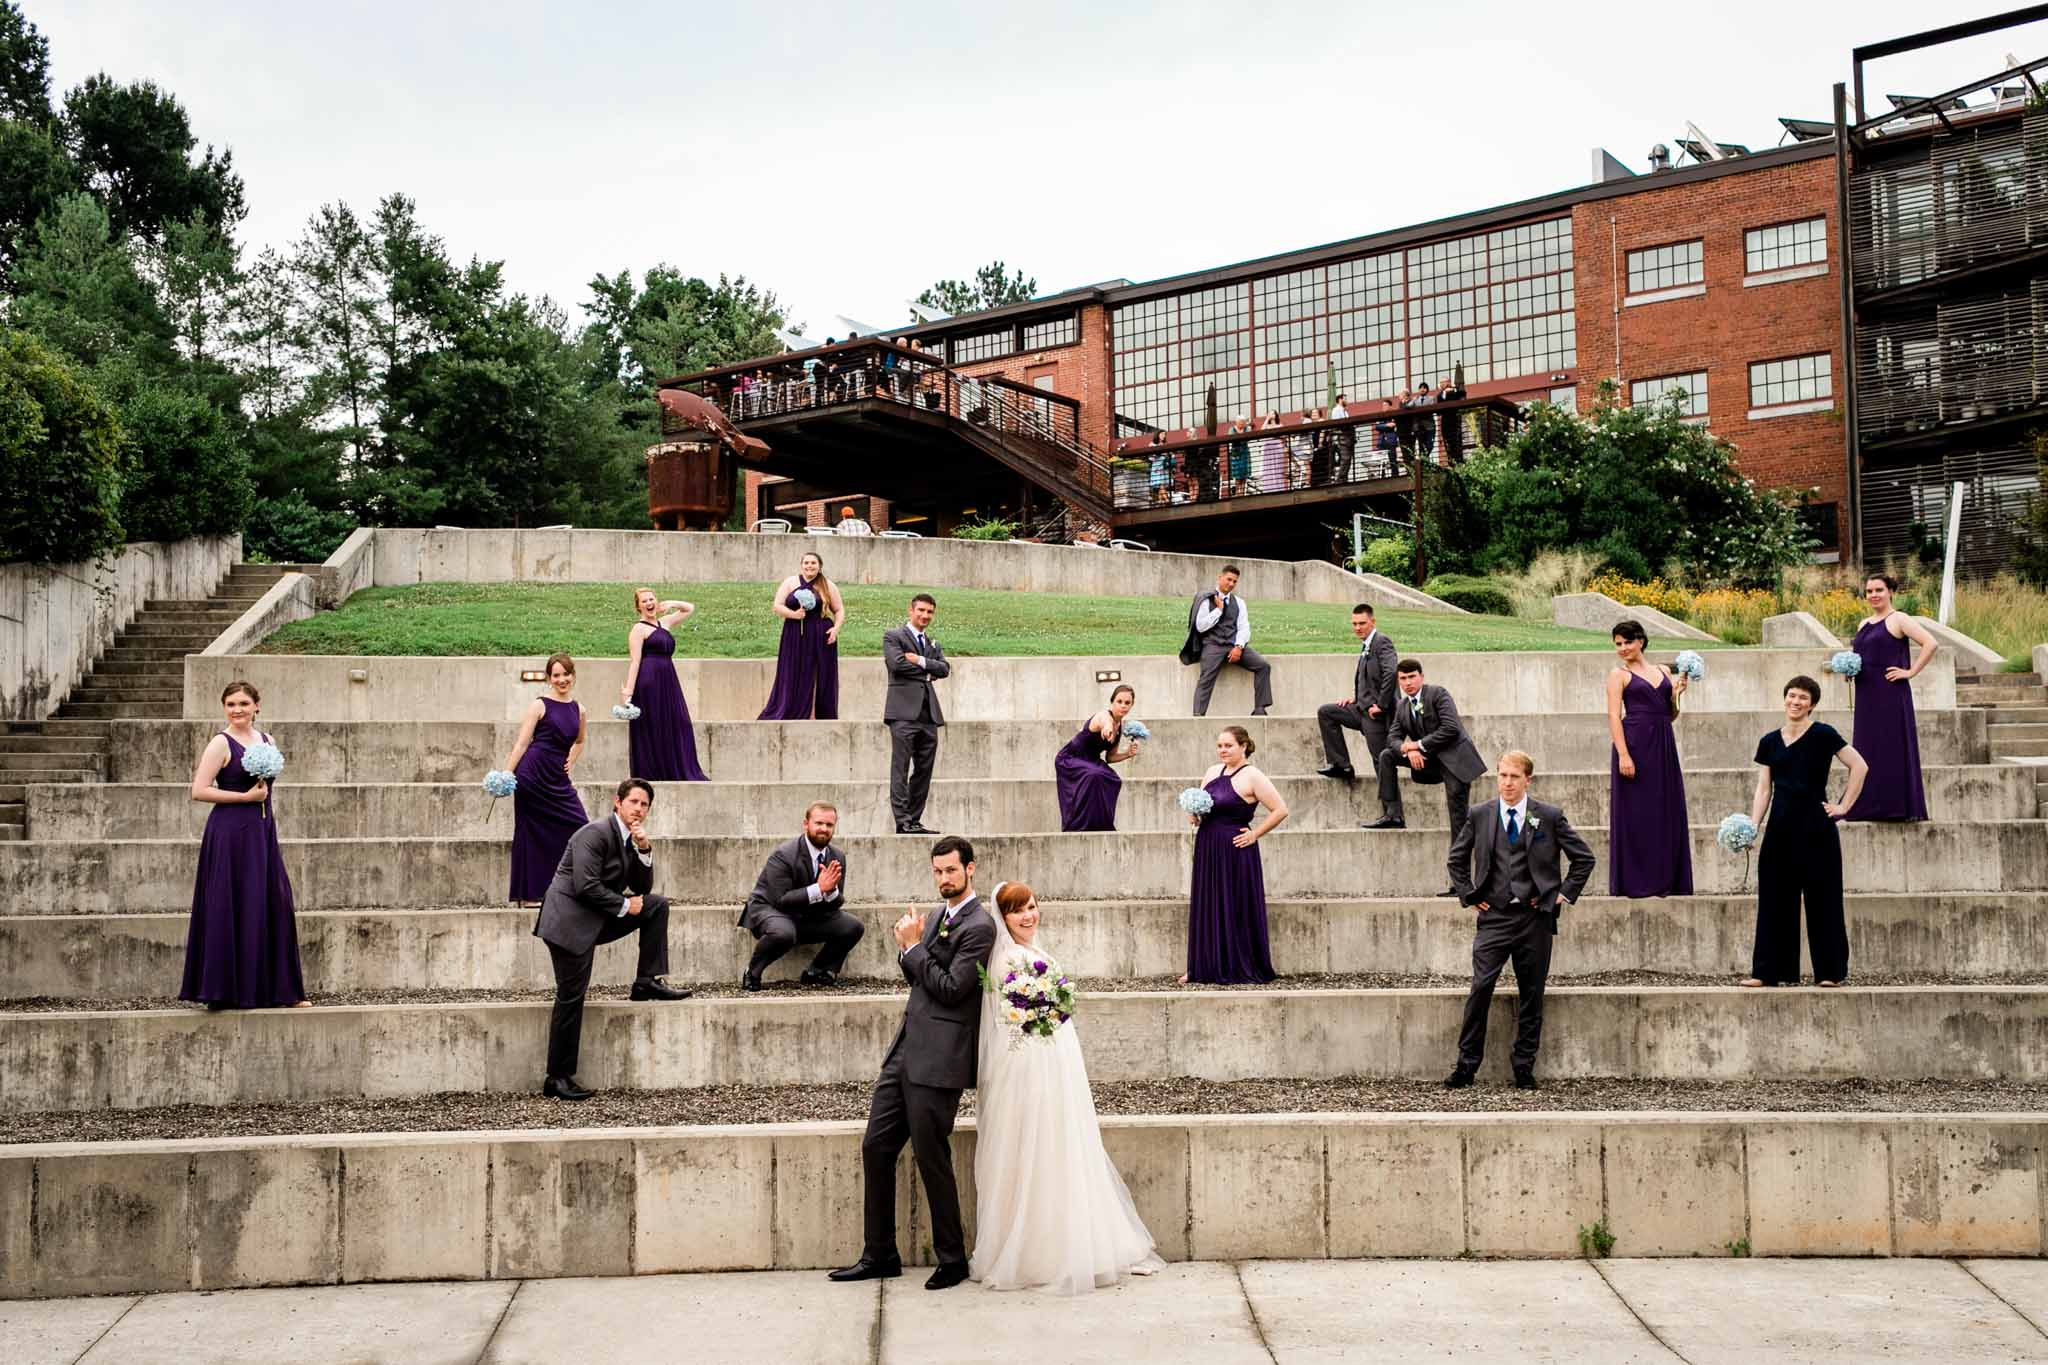 Haw River Ballroom Wedding | Durham Photographer | By G. Lin Photography | Wedding party posing outside at amphitheater